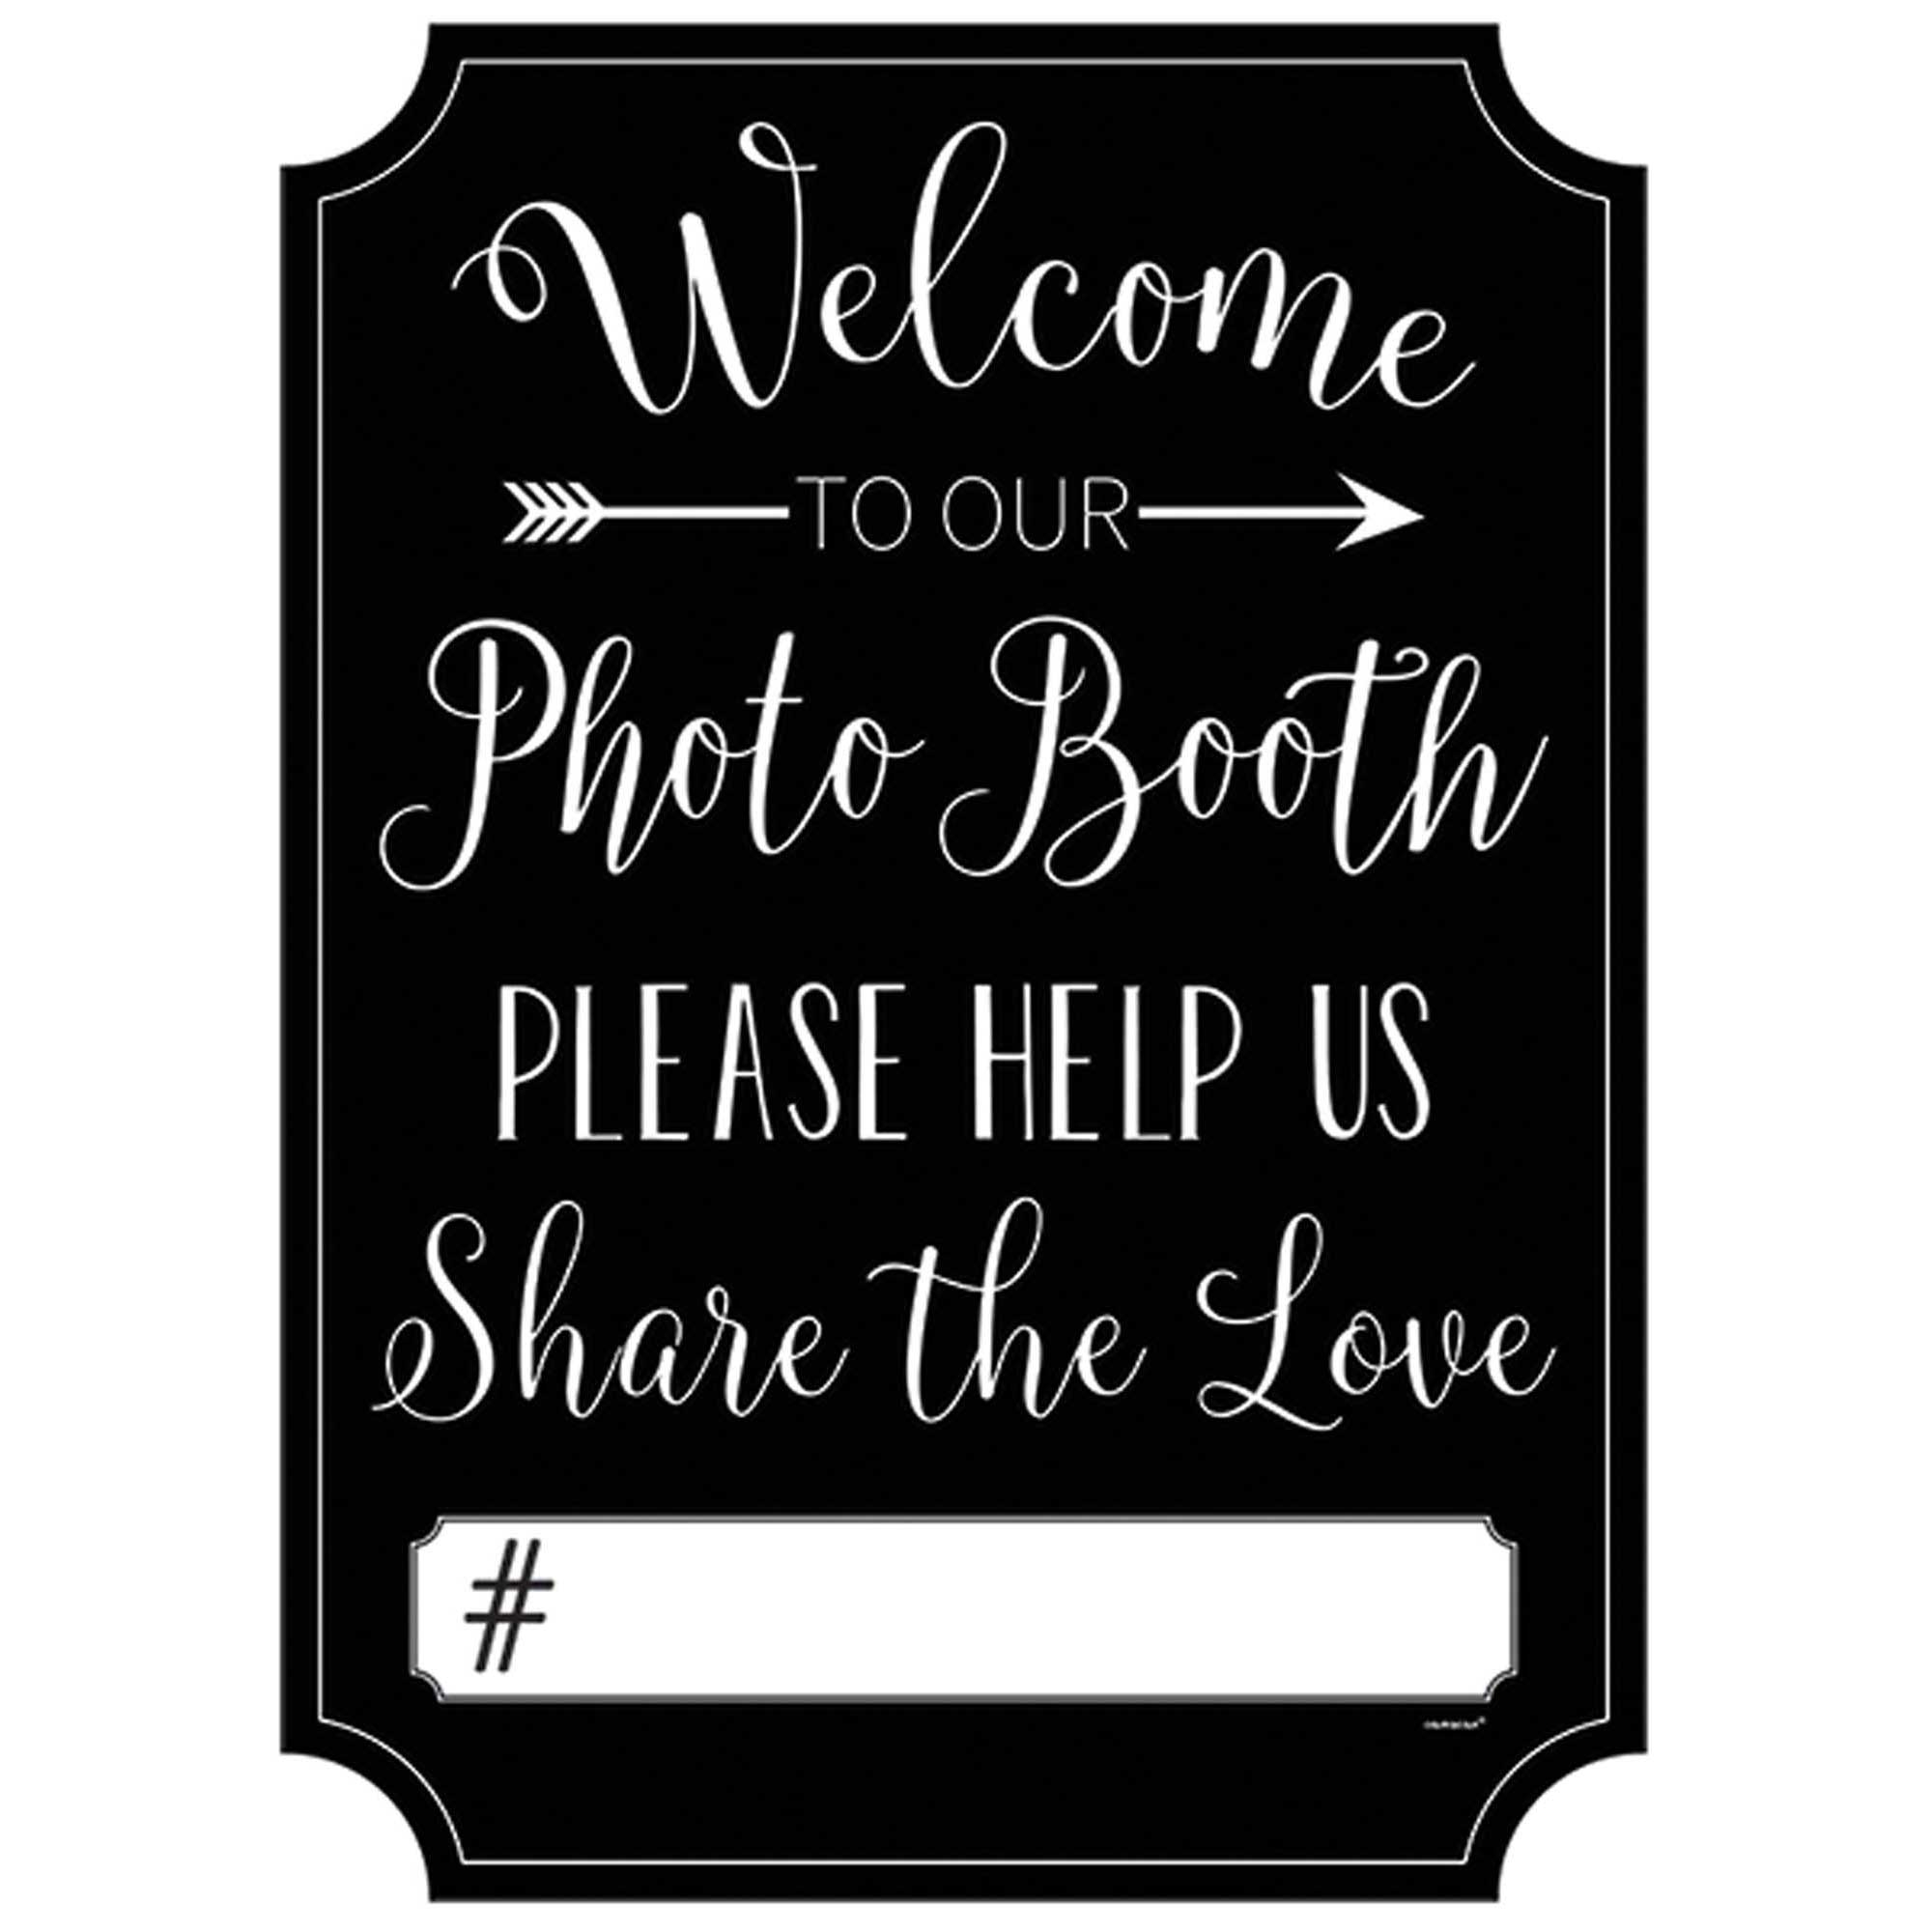 Wedding Photo Booth Sign Cardboard - Party Centre